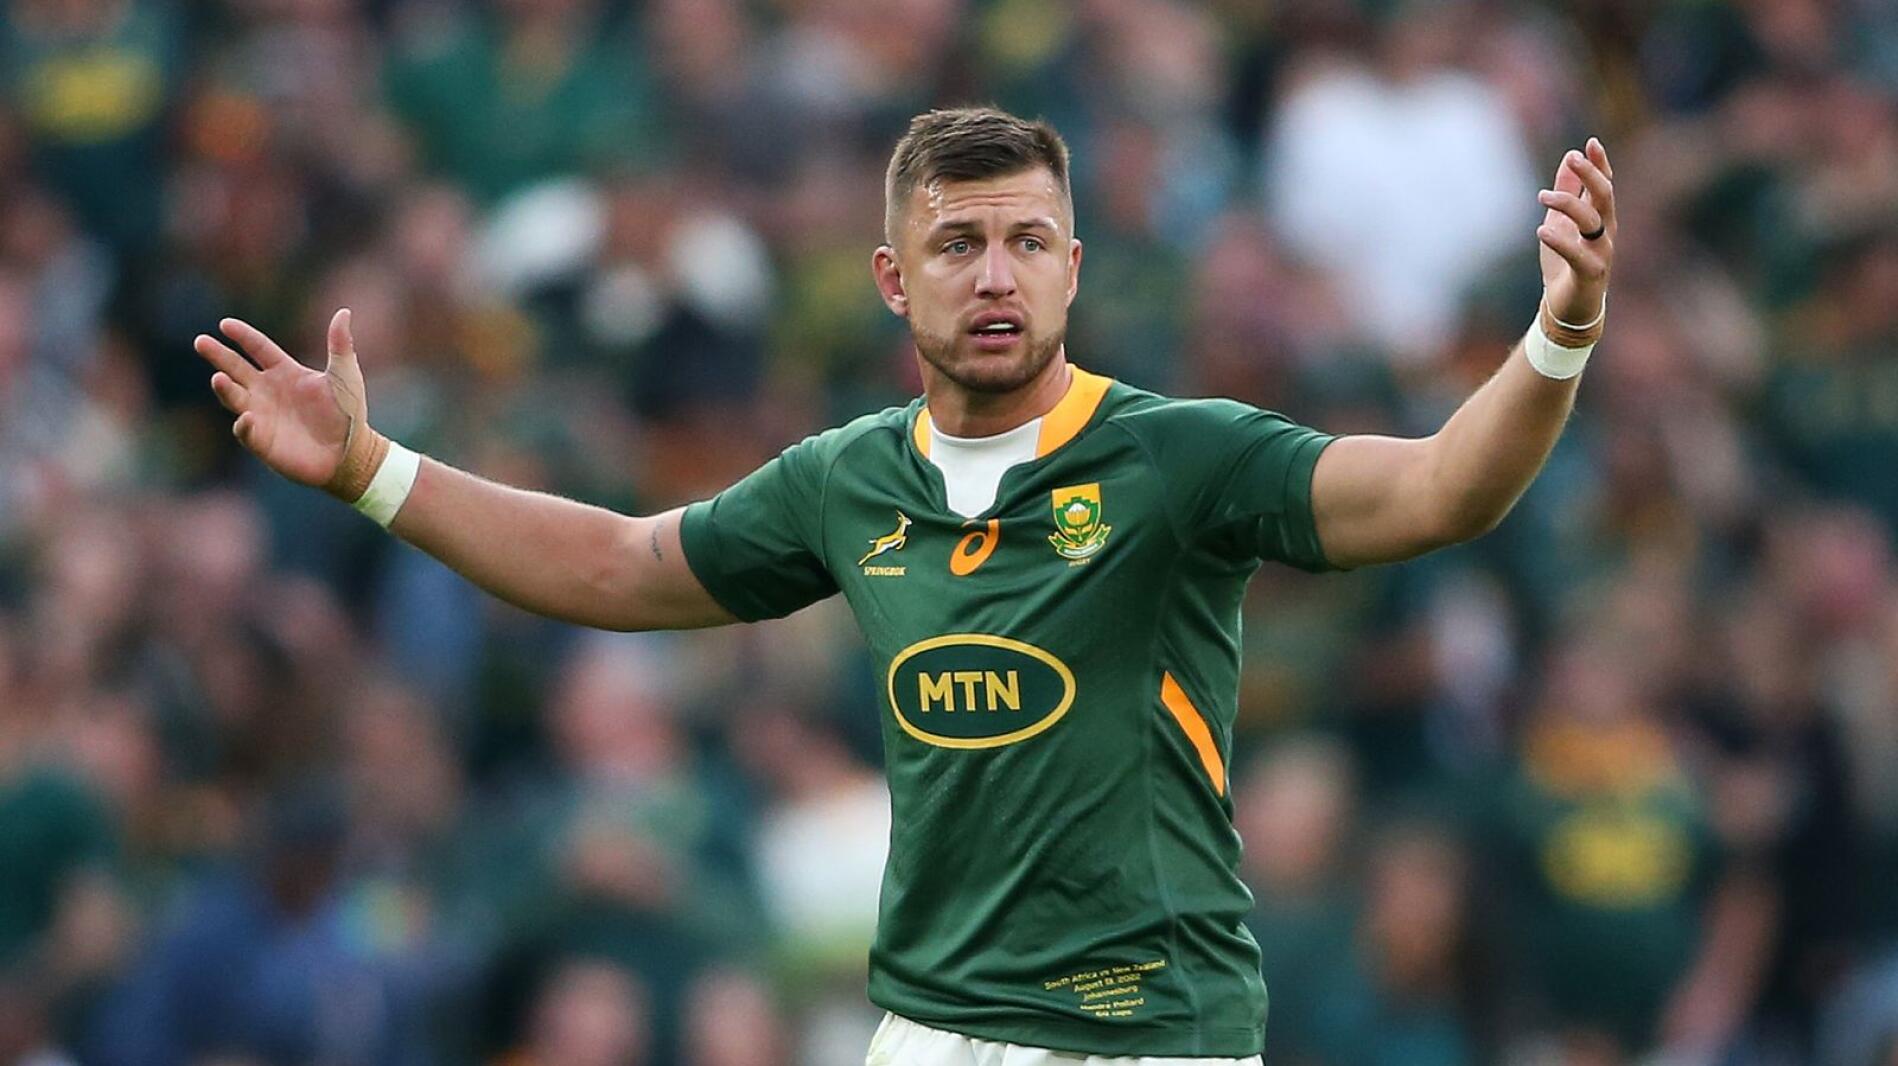 Handre Pollard in action for the Springboks during the 2022 Rugby Championship